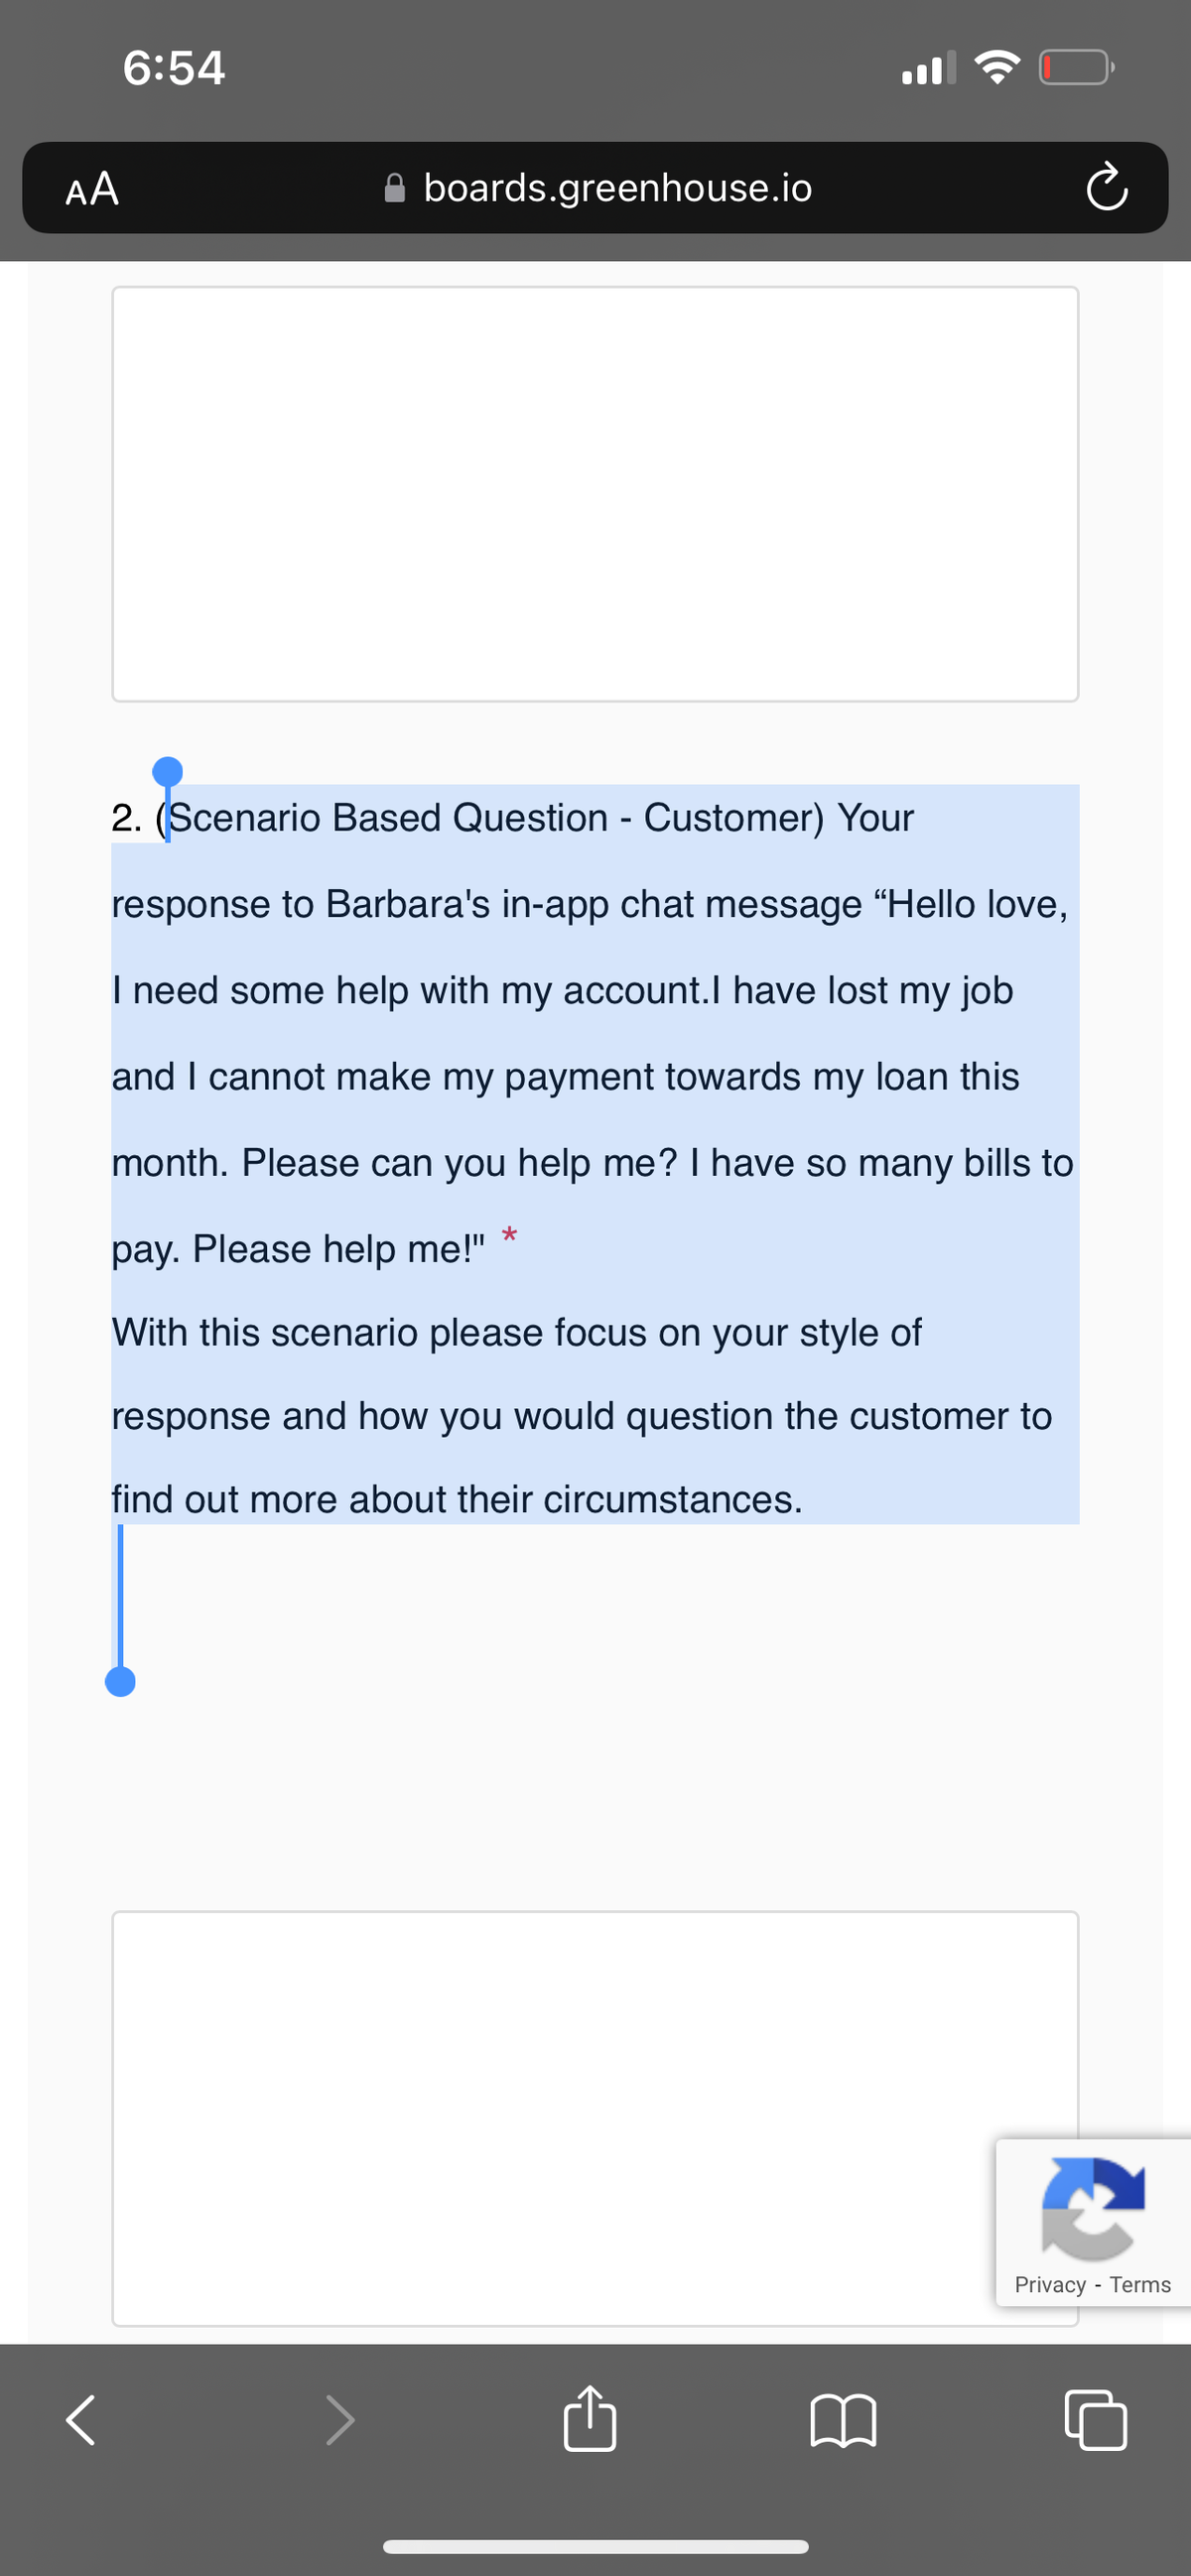 AA
<
6:54
boards.greenhouse.io
2. (Scenario Based Question - Customer) Your
response to Barbara's in-app chat message "Hello love,
I need some help with my account. I have lost my job
and I cannot make my payment towards my loan this
month. Please can you help me? I have so many bills to
pay. Please help me!"
With this scenario please focus on your style of
response and how you would question the customer to
find out more about their circumstances.
★
Privacy - Terms